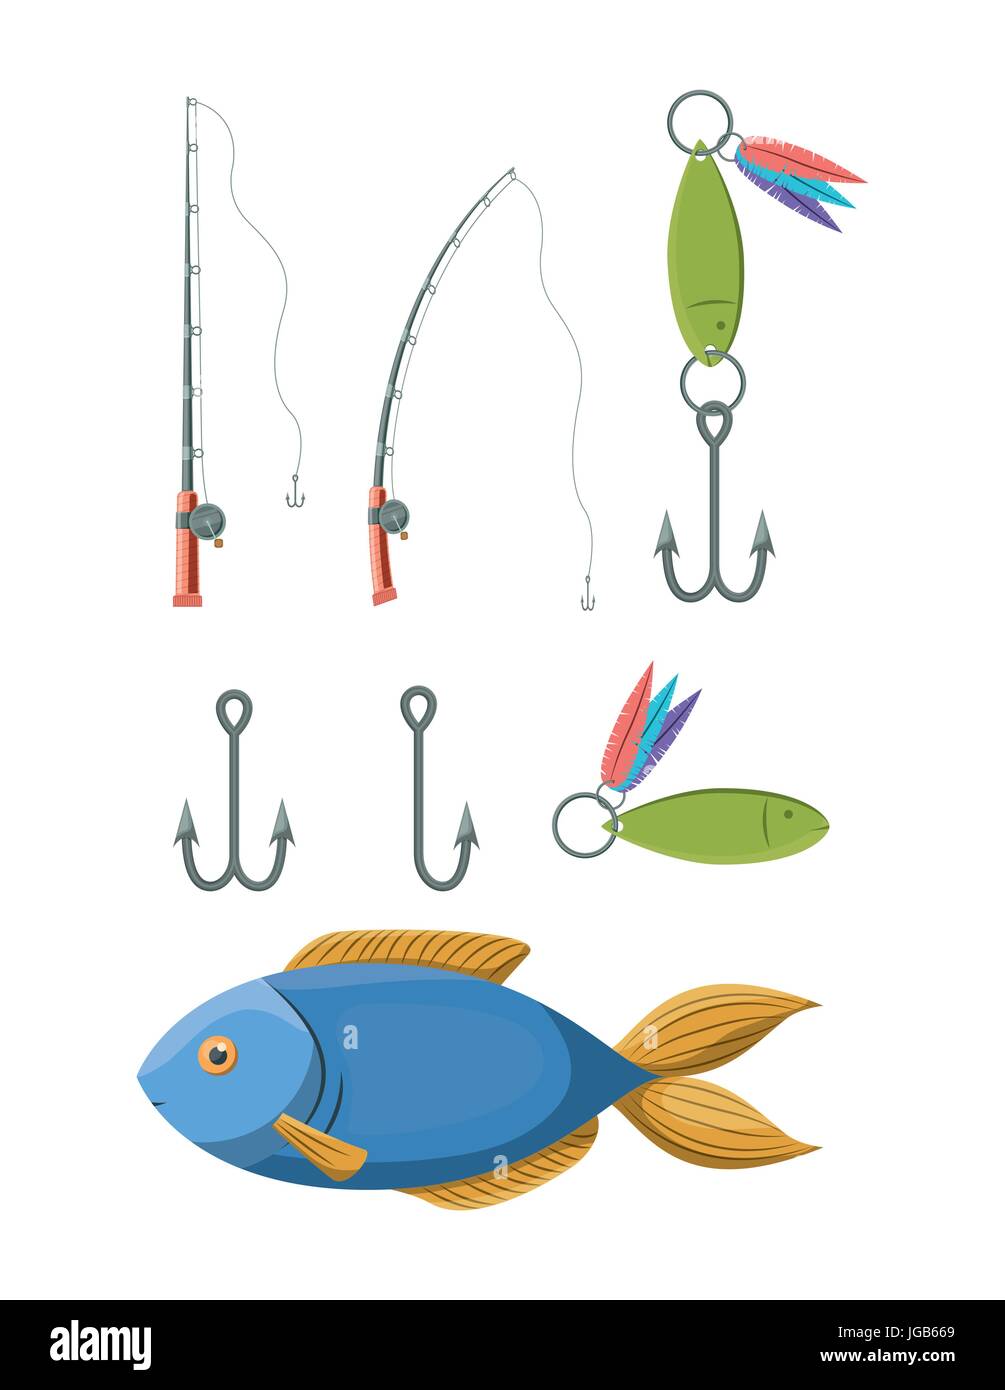 https://c8.alamy.com/comp/JGB669/colorful-set-collection-elements-to-fishing-rod-and-hooks-JGB669.jpg